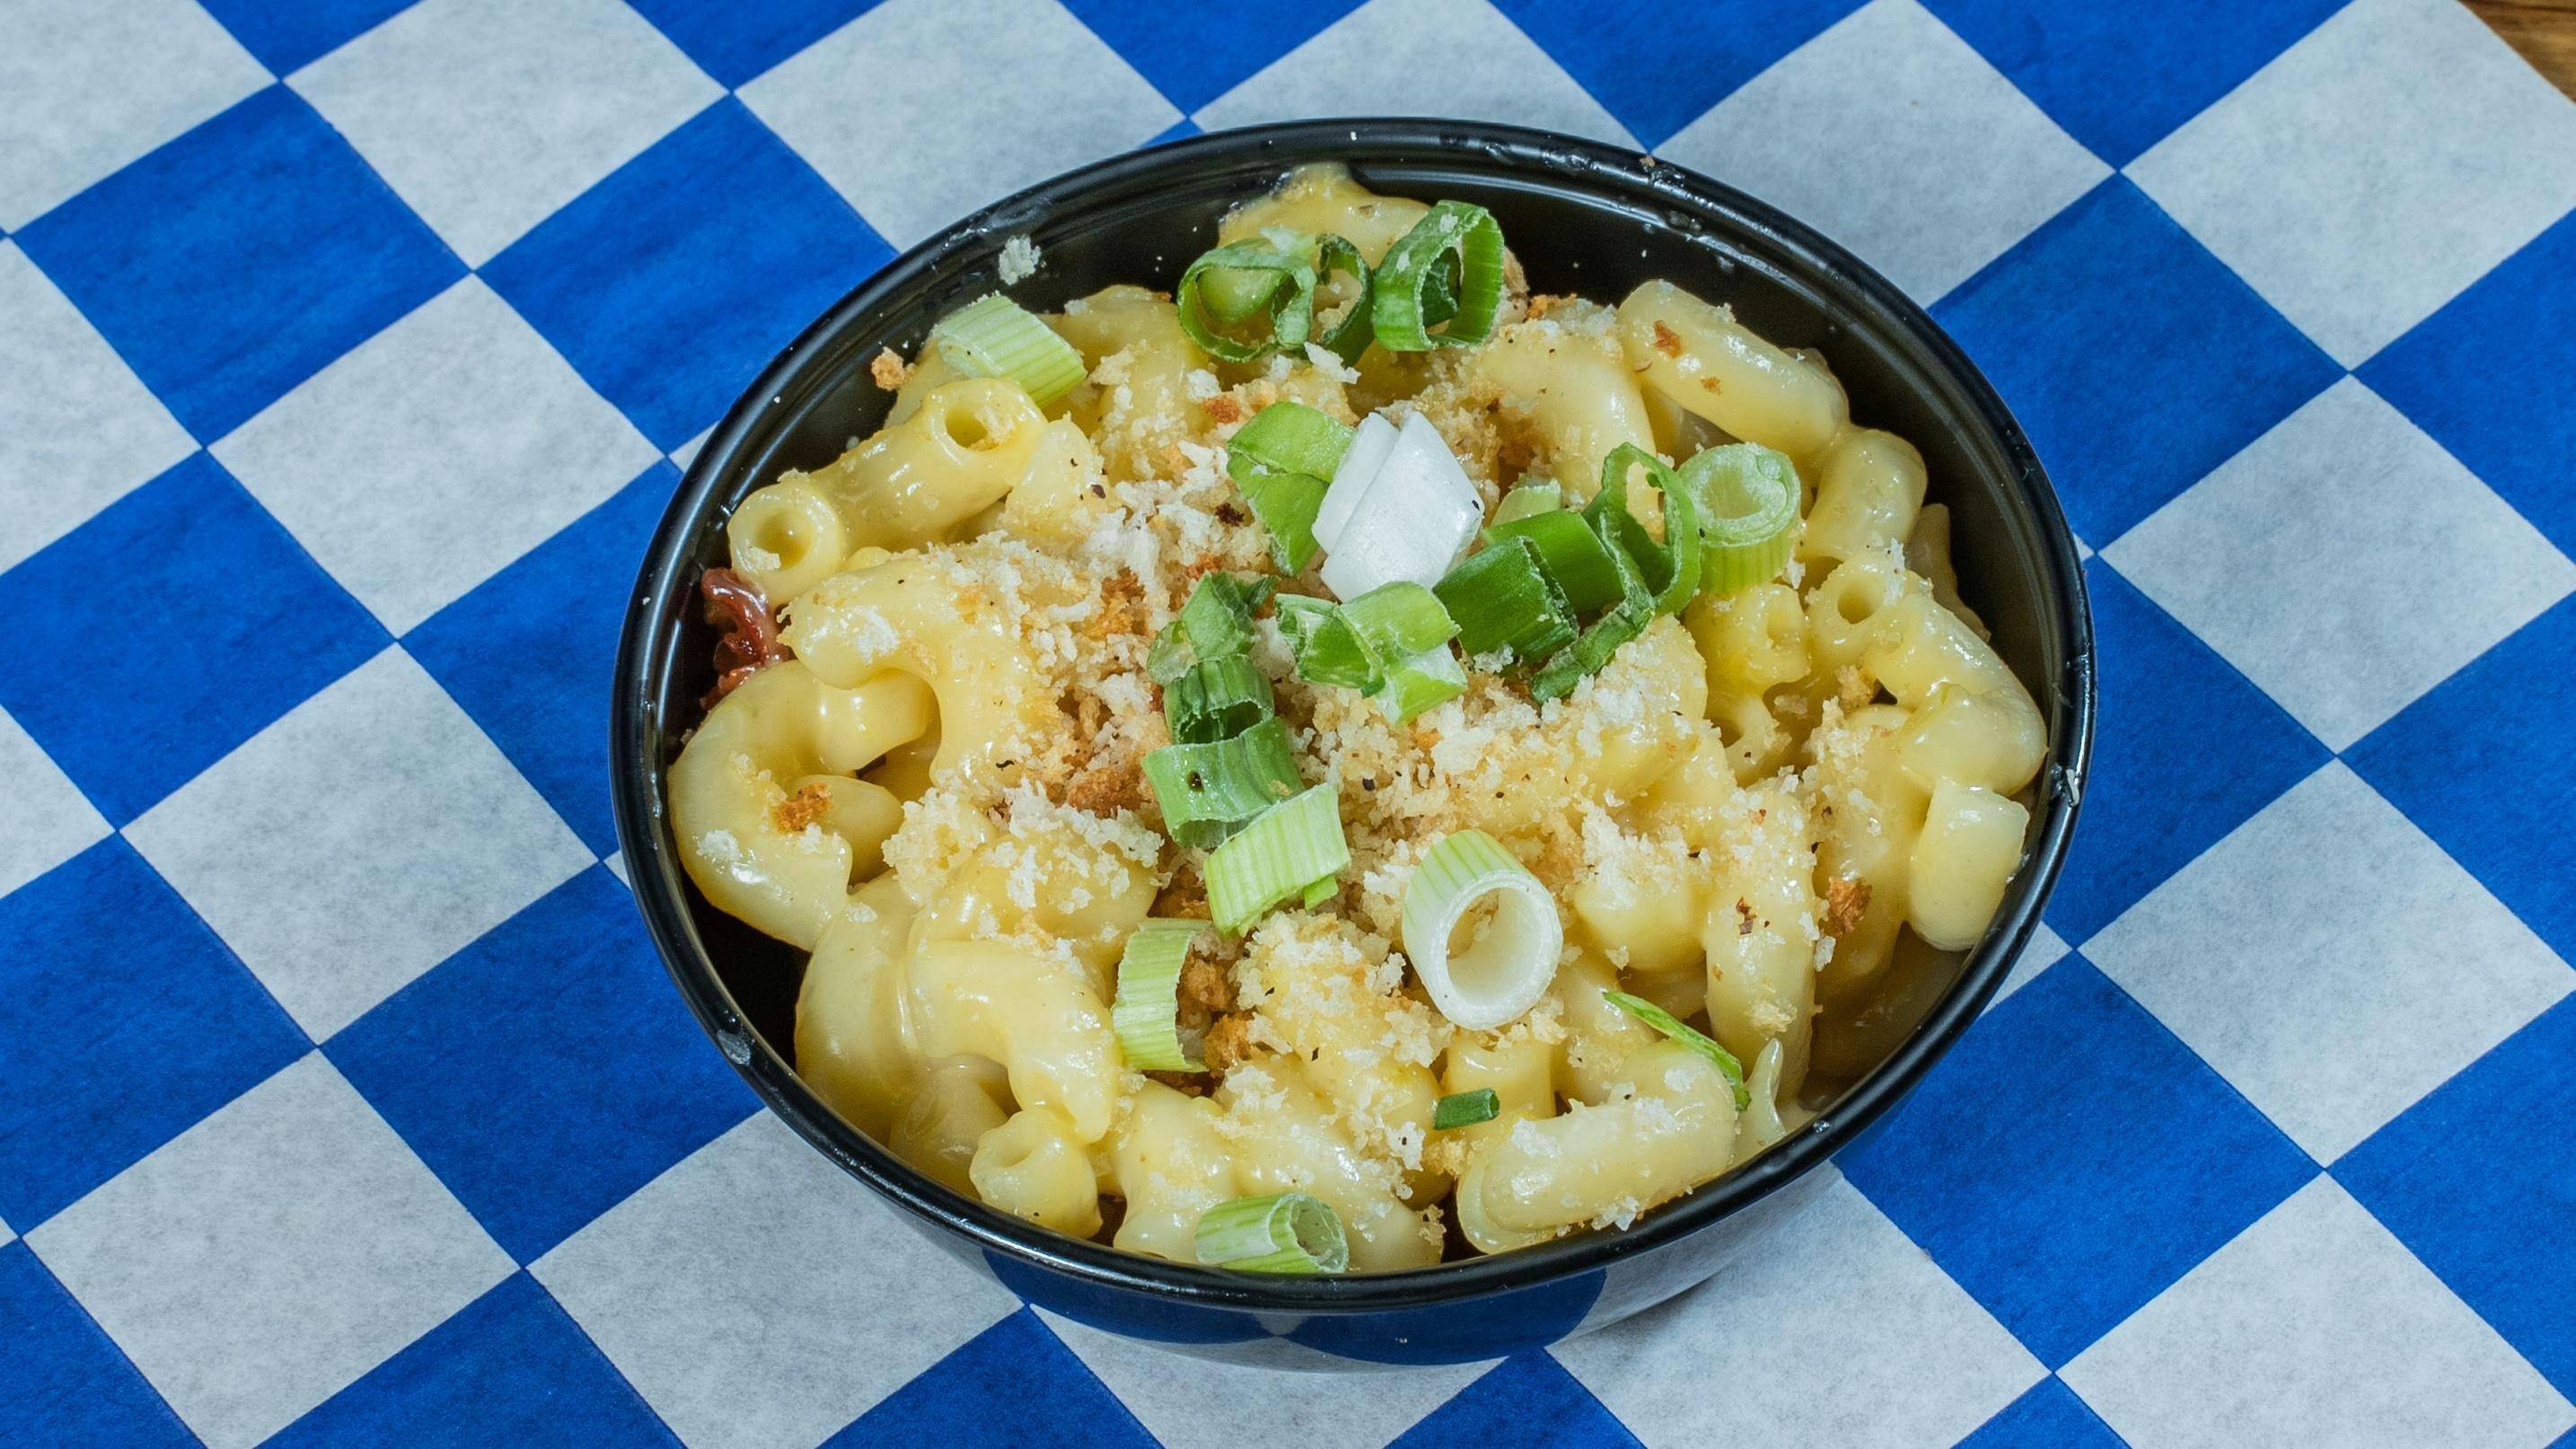 White Cheddar Mac & Cheese from Happy Chicks - Burnet Rd in Austin, TX